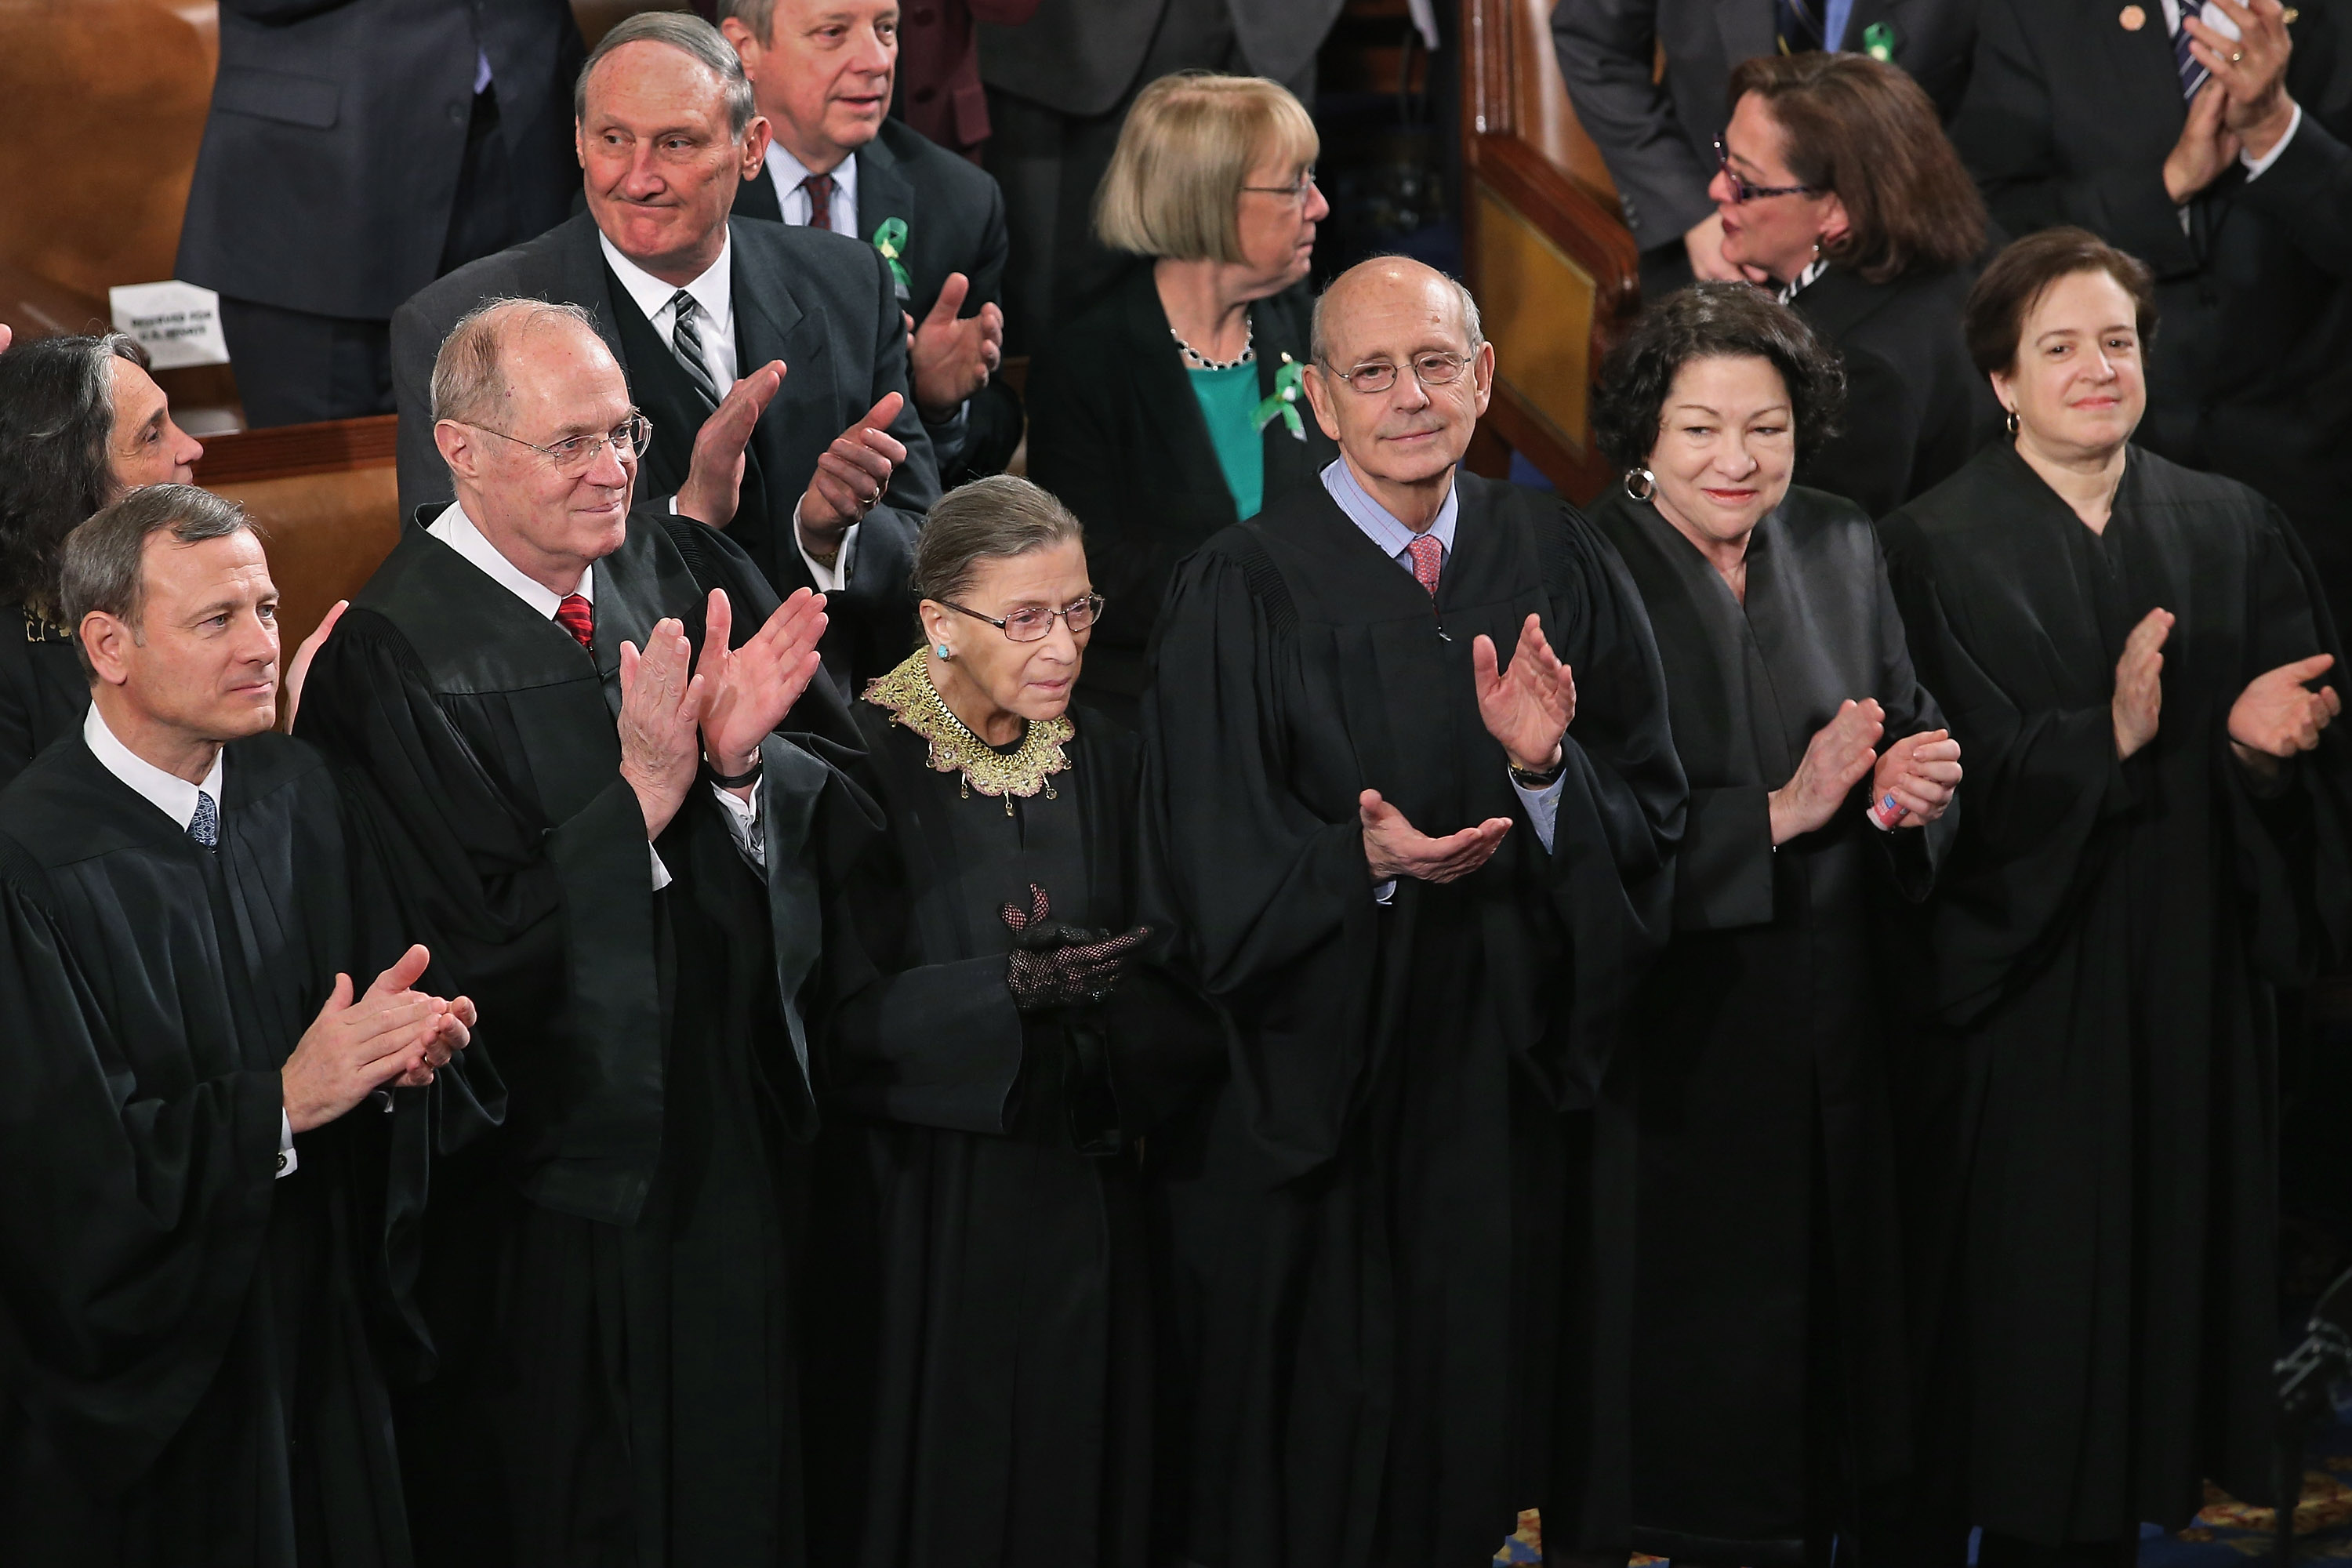 Members of the Supreme Court, (L-R) Chief Justice John Roberts and associate justices Anthony Kennendy, Ruth Bader Ginsburg, John Paul Stevens, Sonia Sotomayor and Elena Kagan, applaud as U.S. President Barack Obama arrives to deliver his State of the Union speech before a joint session of Congress at the U.S. Capitol in Washington on February 12, 2013. (Chip Somodevilla—Getty Images)